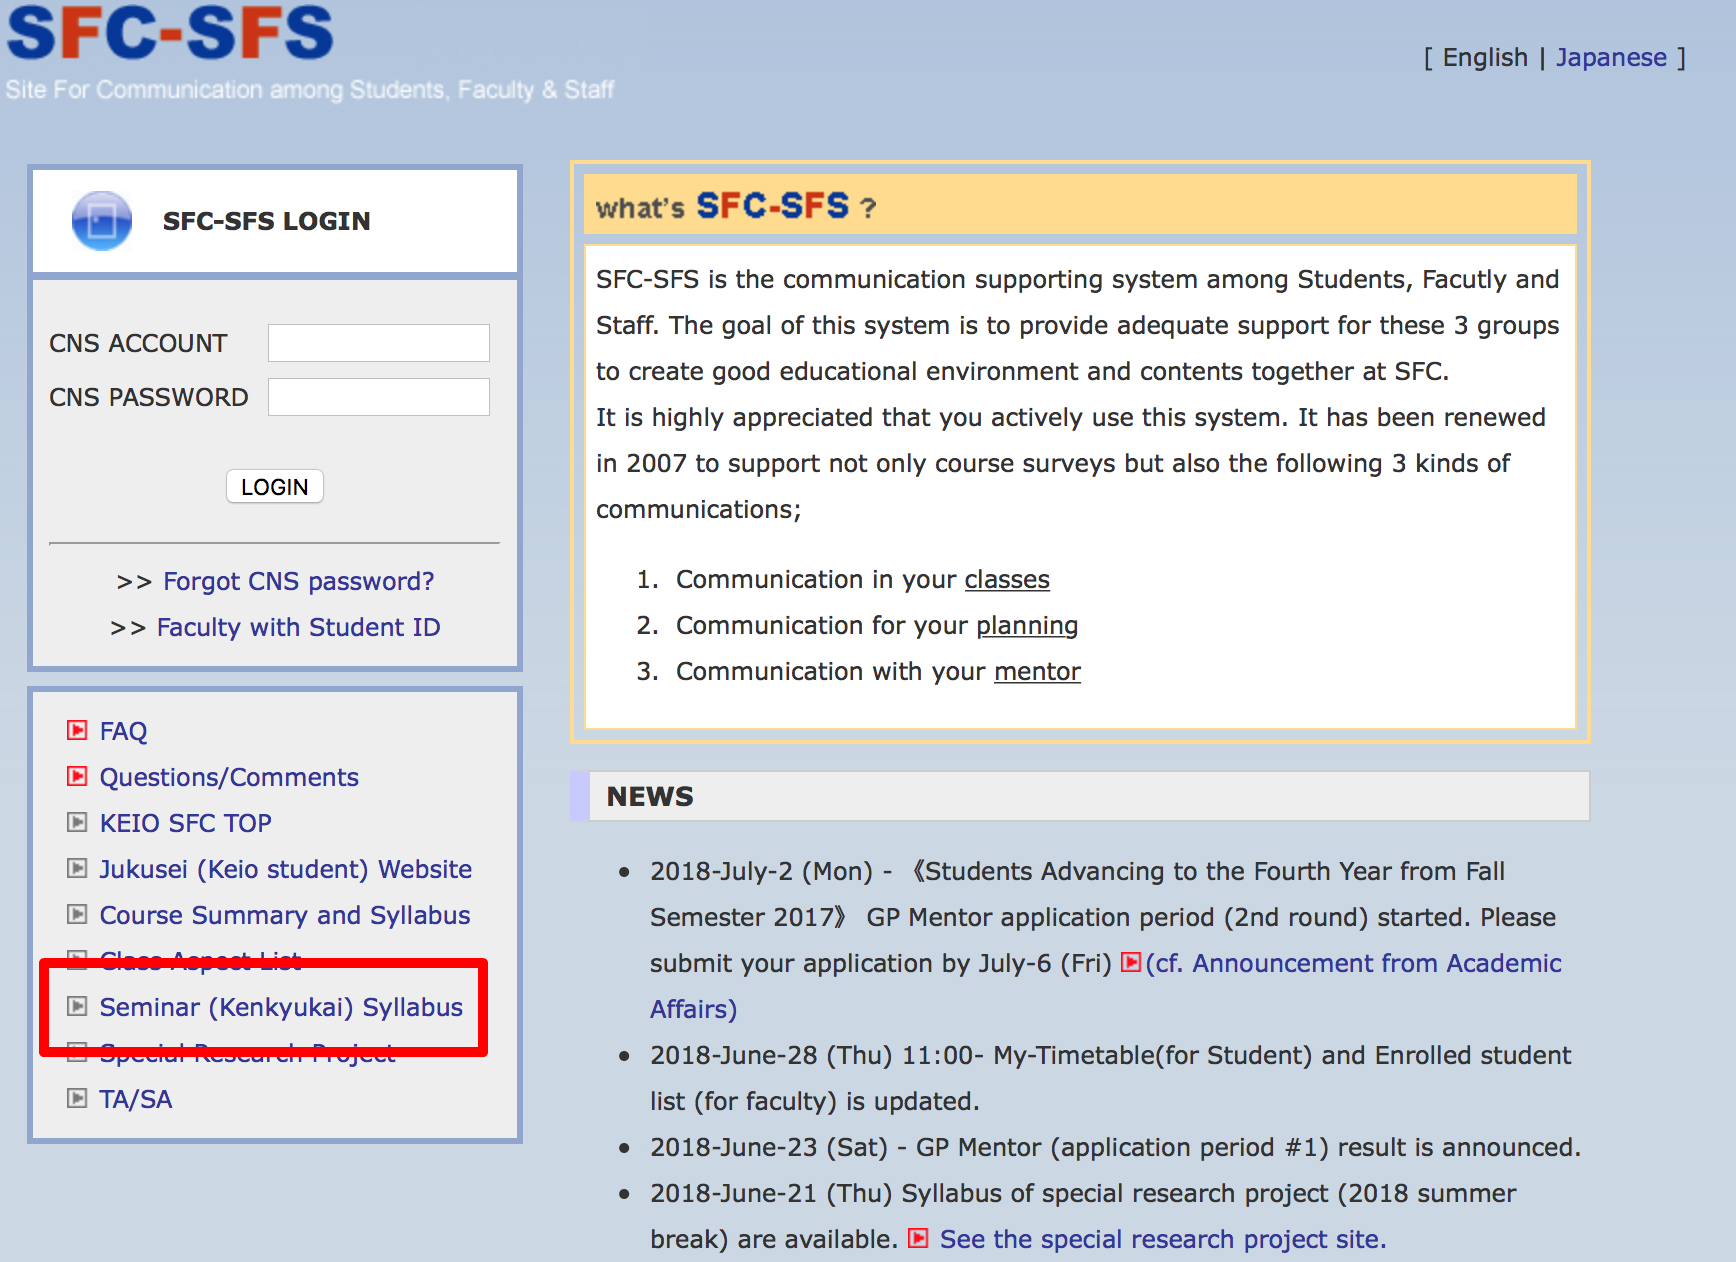 SFC-SFS login page (click the link in the red box to access the seminar syllabus page)